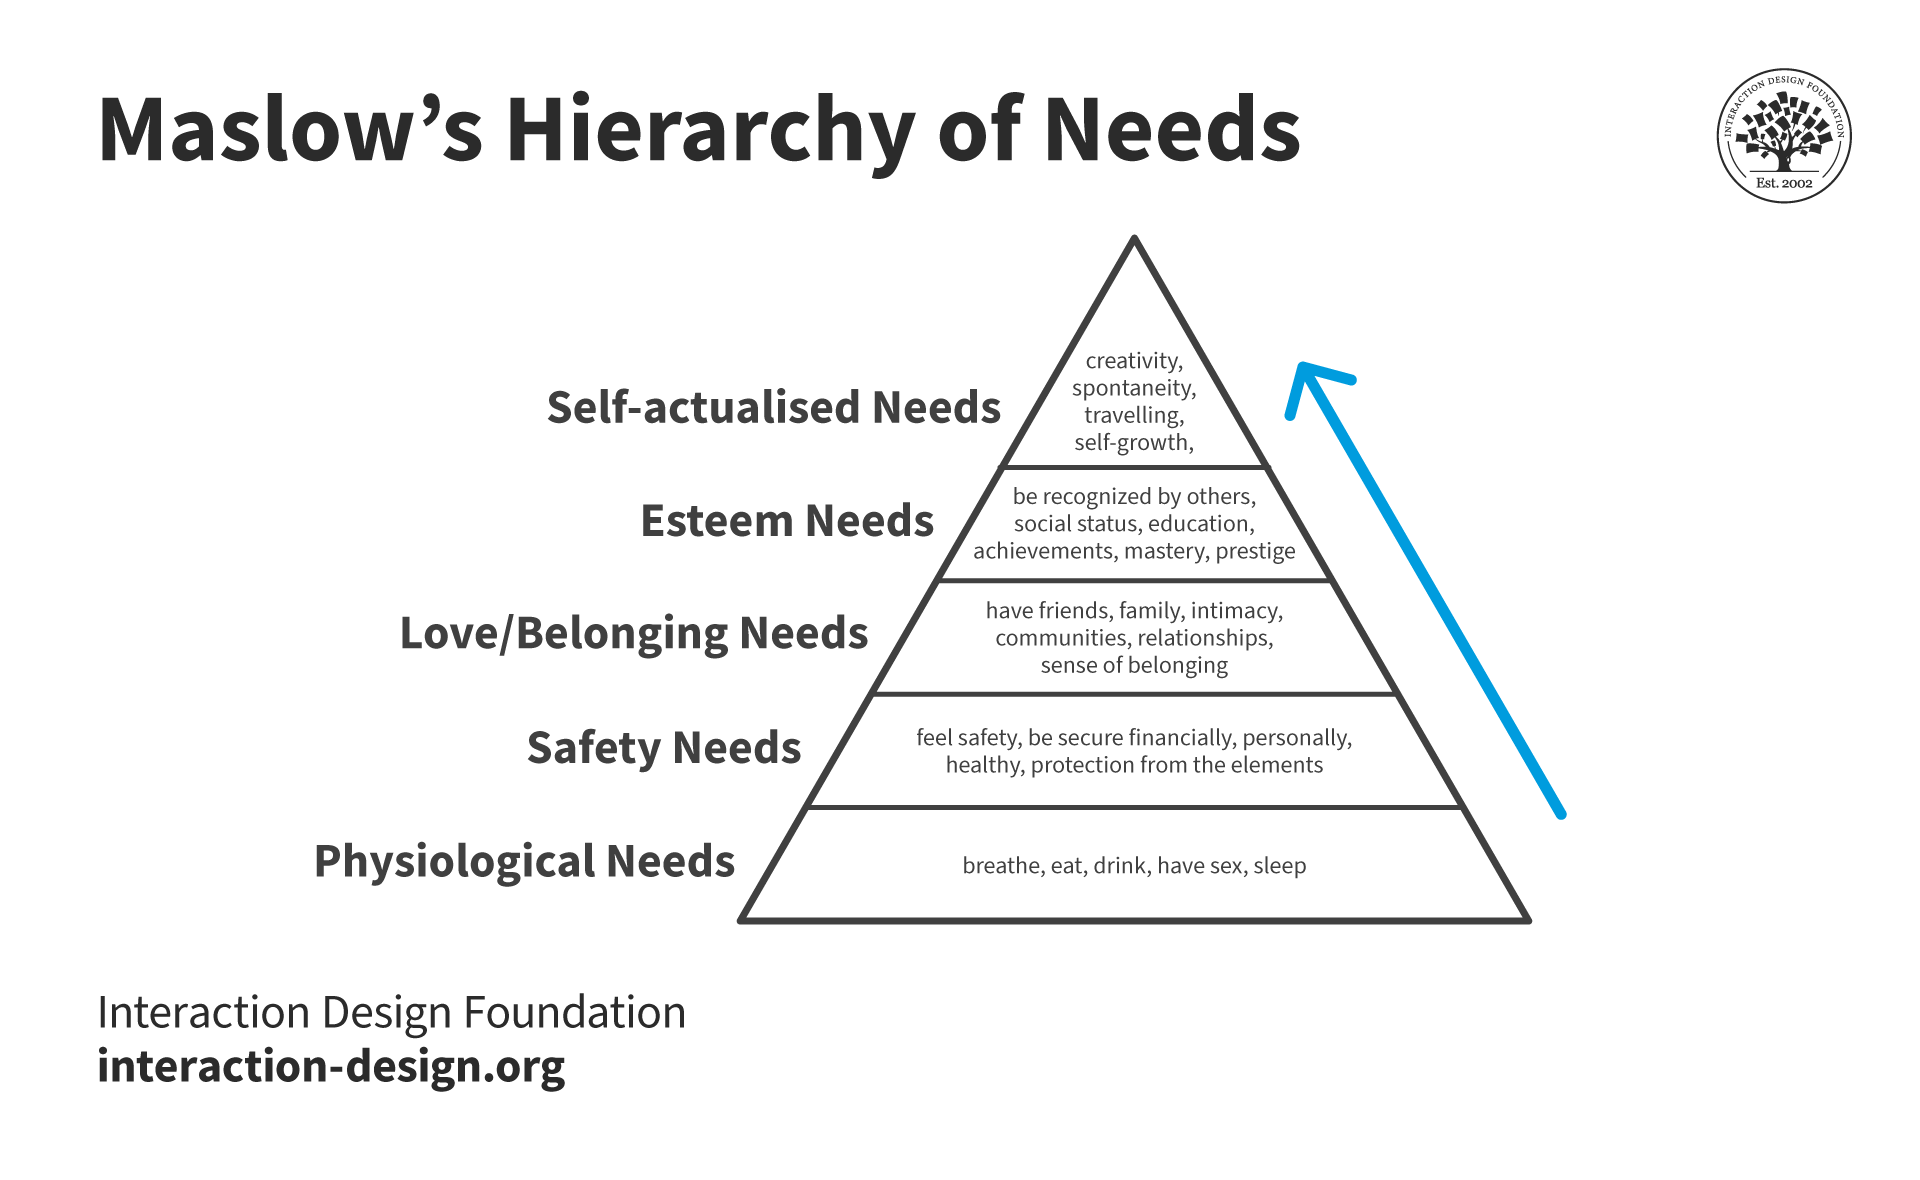 Maslow's Hierarchy of Needs has physiological needs as the base of the pyramid, followed by safety, love and belonging, esteem and self-actualization needs on the top.